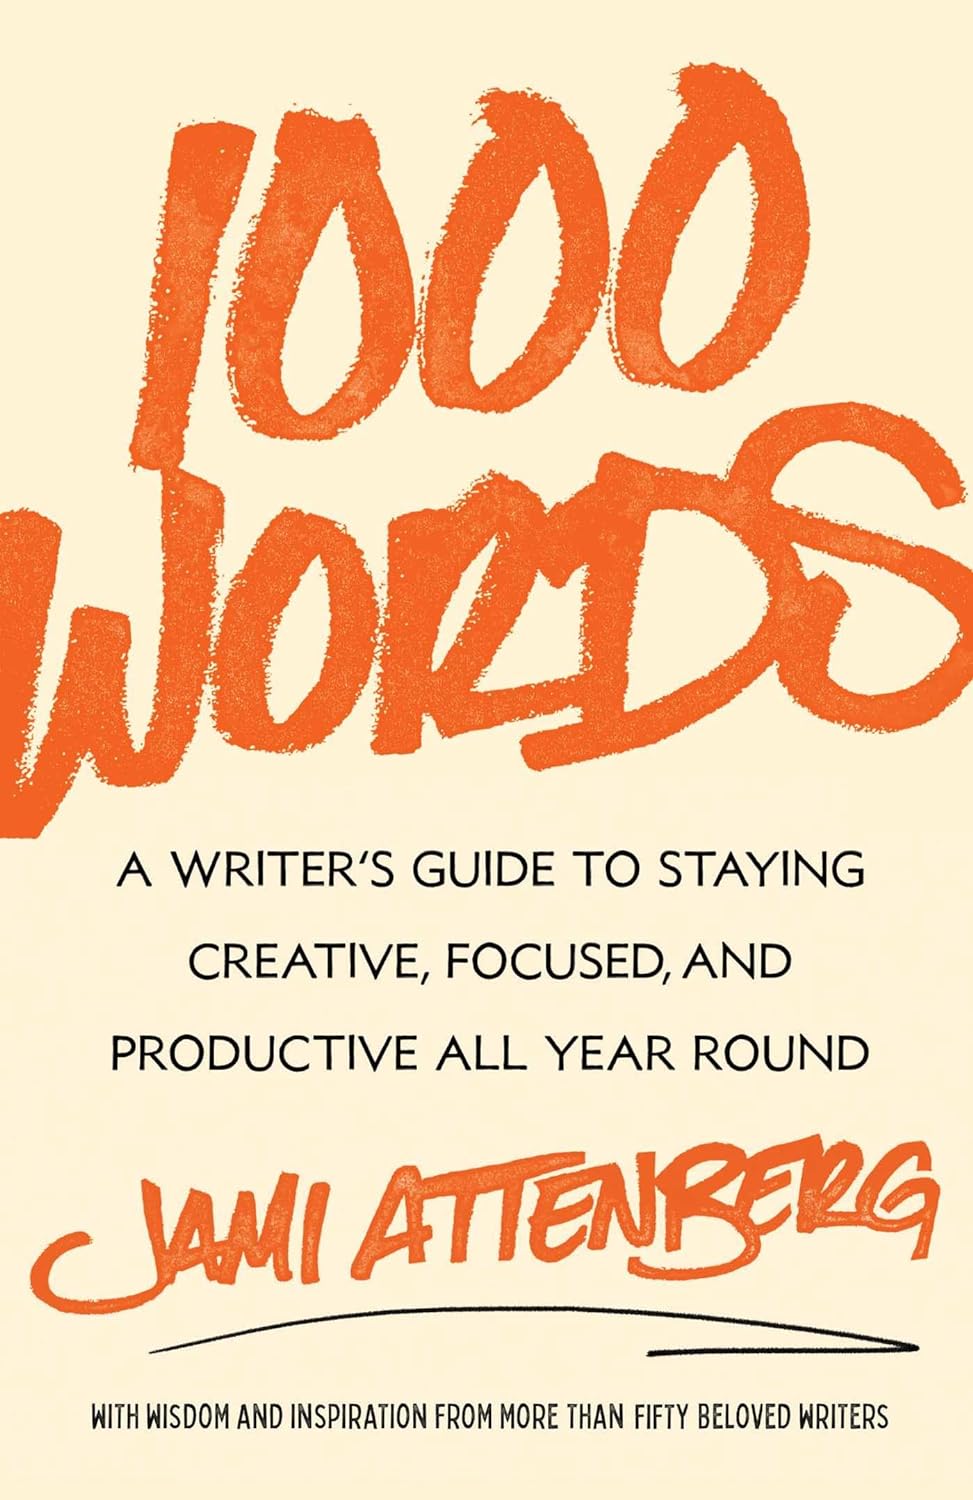 Affiliate link to the book 1000 Words: A Writer's Guide to Staying Creative, Focused, and Productive All Year Round by Jami Attenberg (2024)